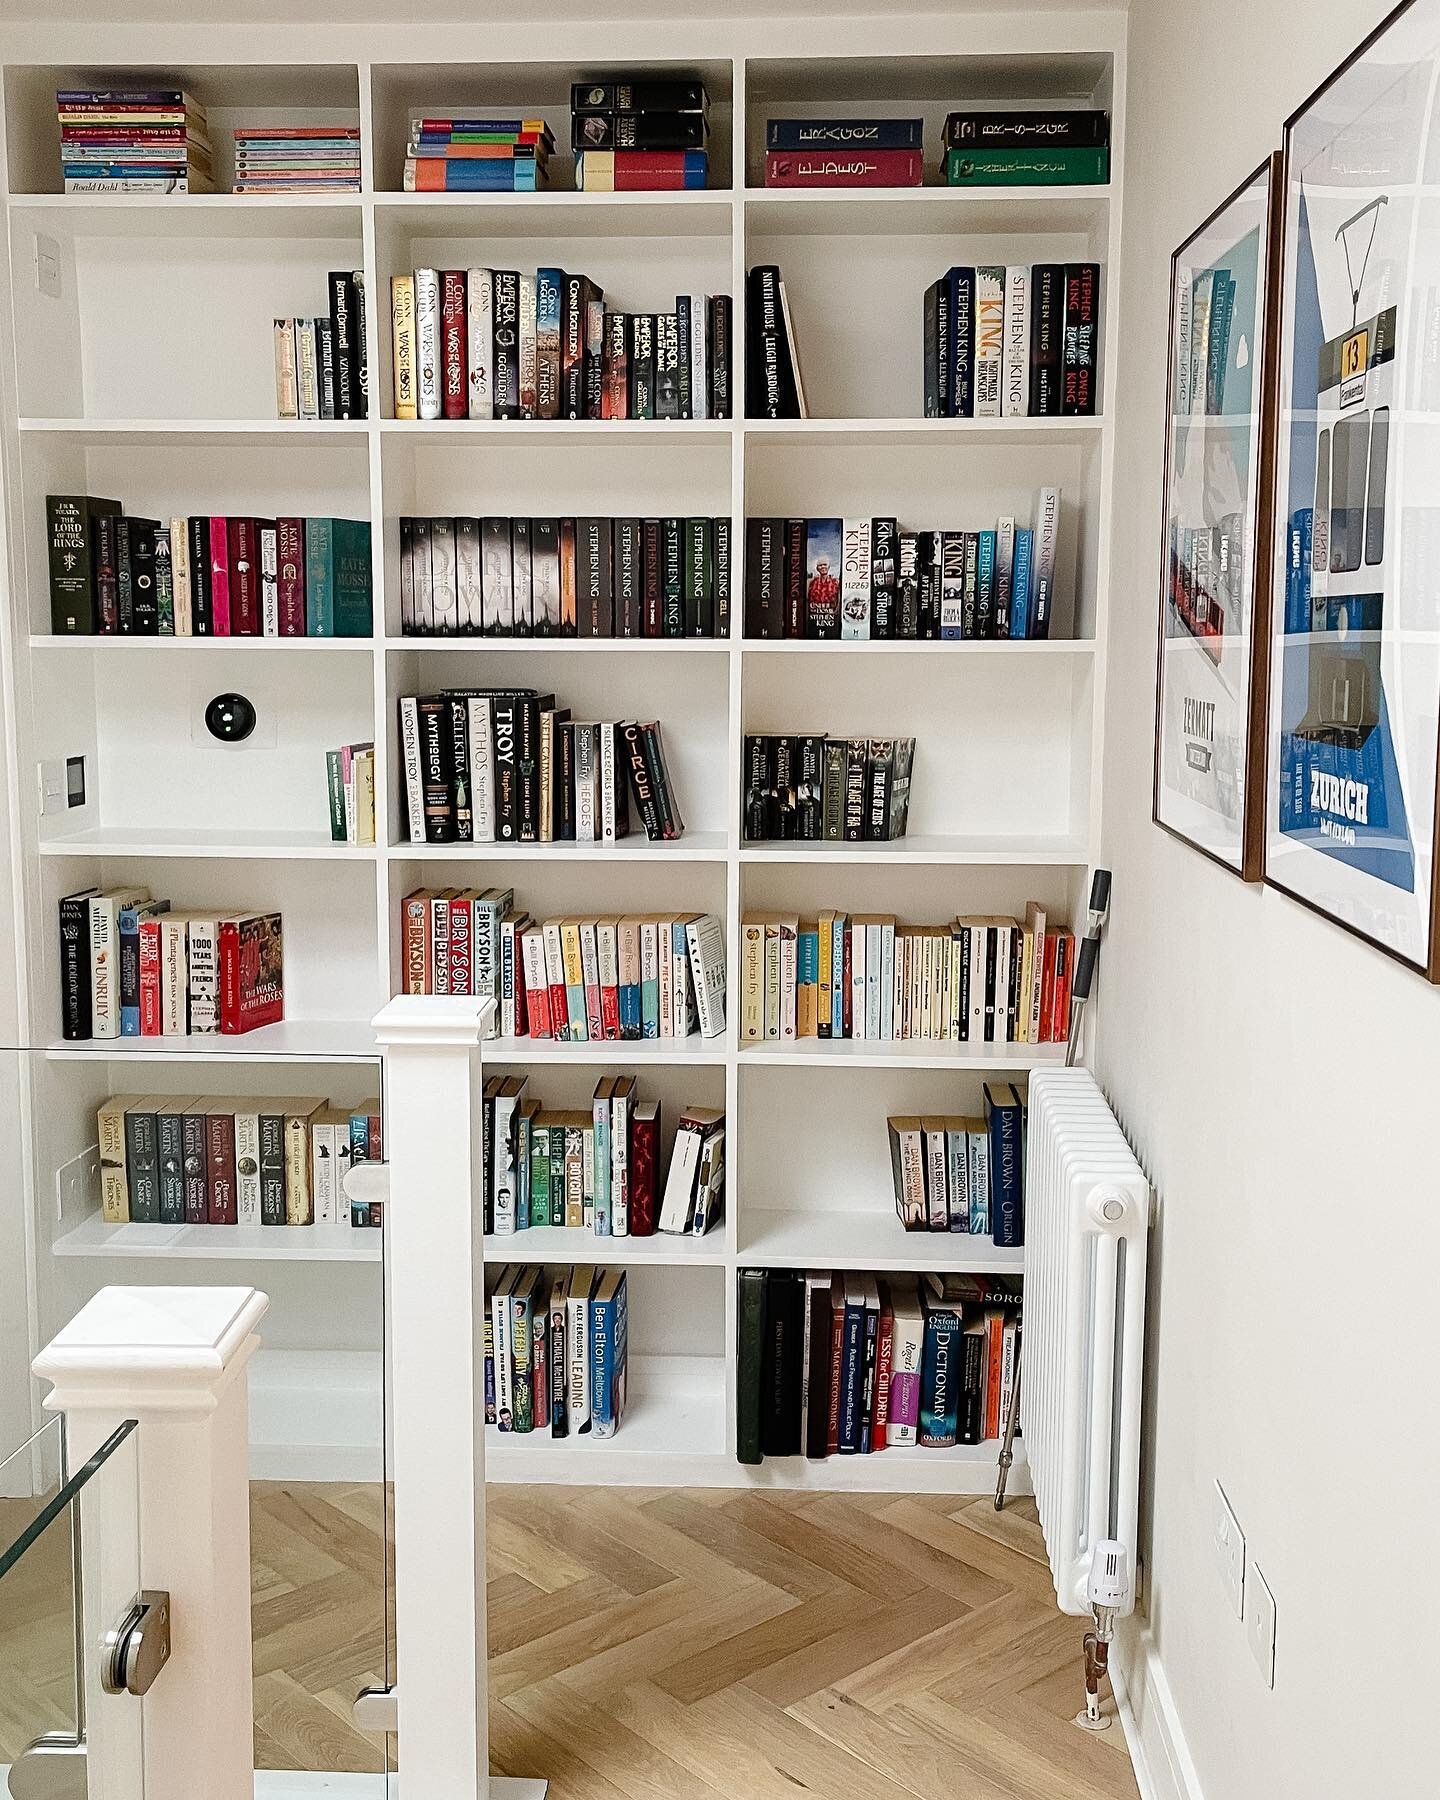 Here's the transformed staircase and landing from a recently completed project in West Dulwich. The client had a collection of New Yorkers from his time living in NYC, and a hell of a lot of books. 

We emphasised the double height staircase by creat